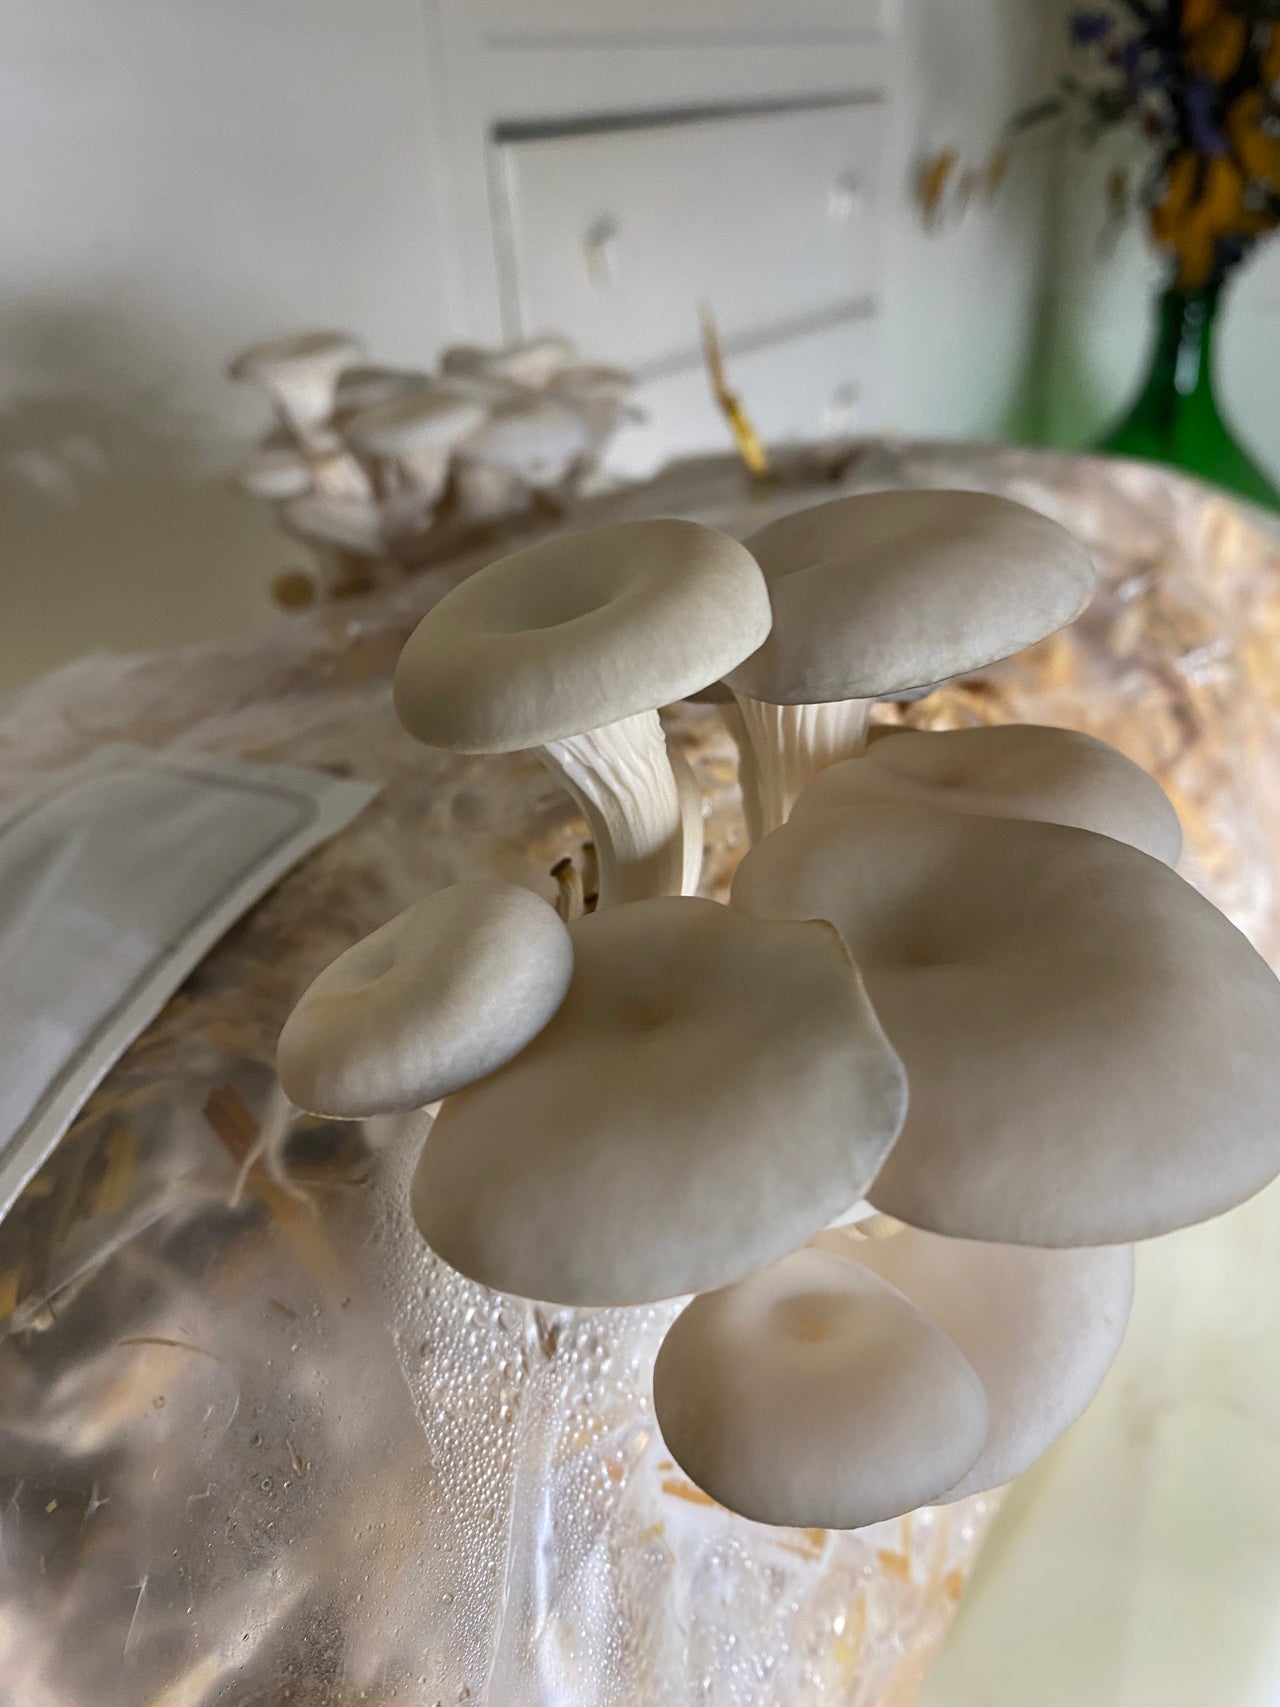 How To Grow Mushrooms on Straw: A Step by Step Guide